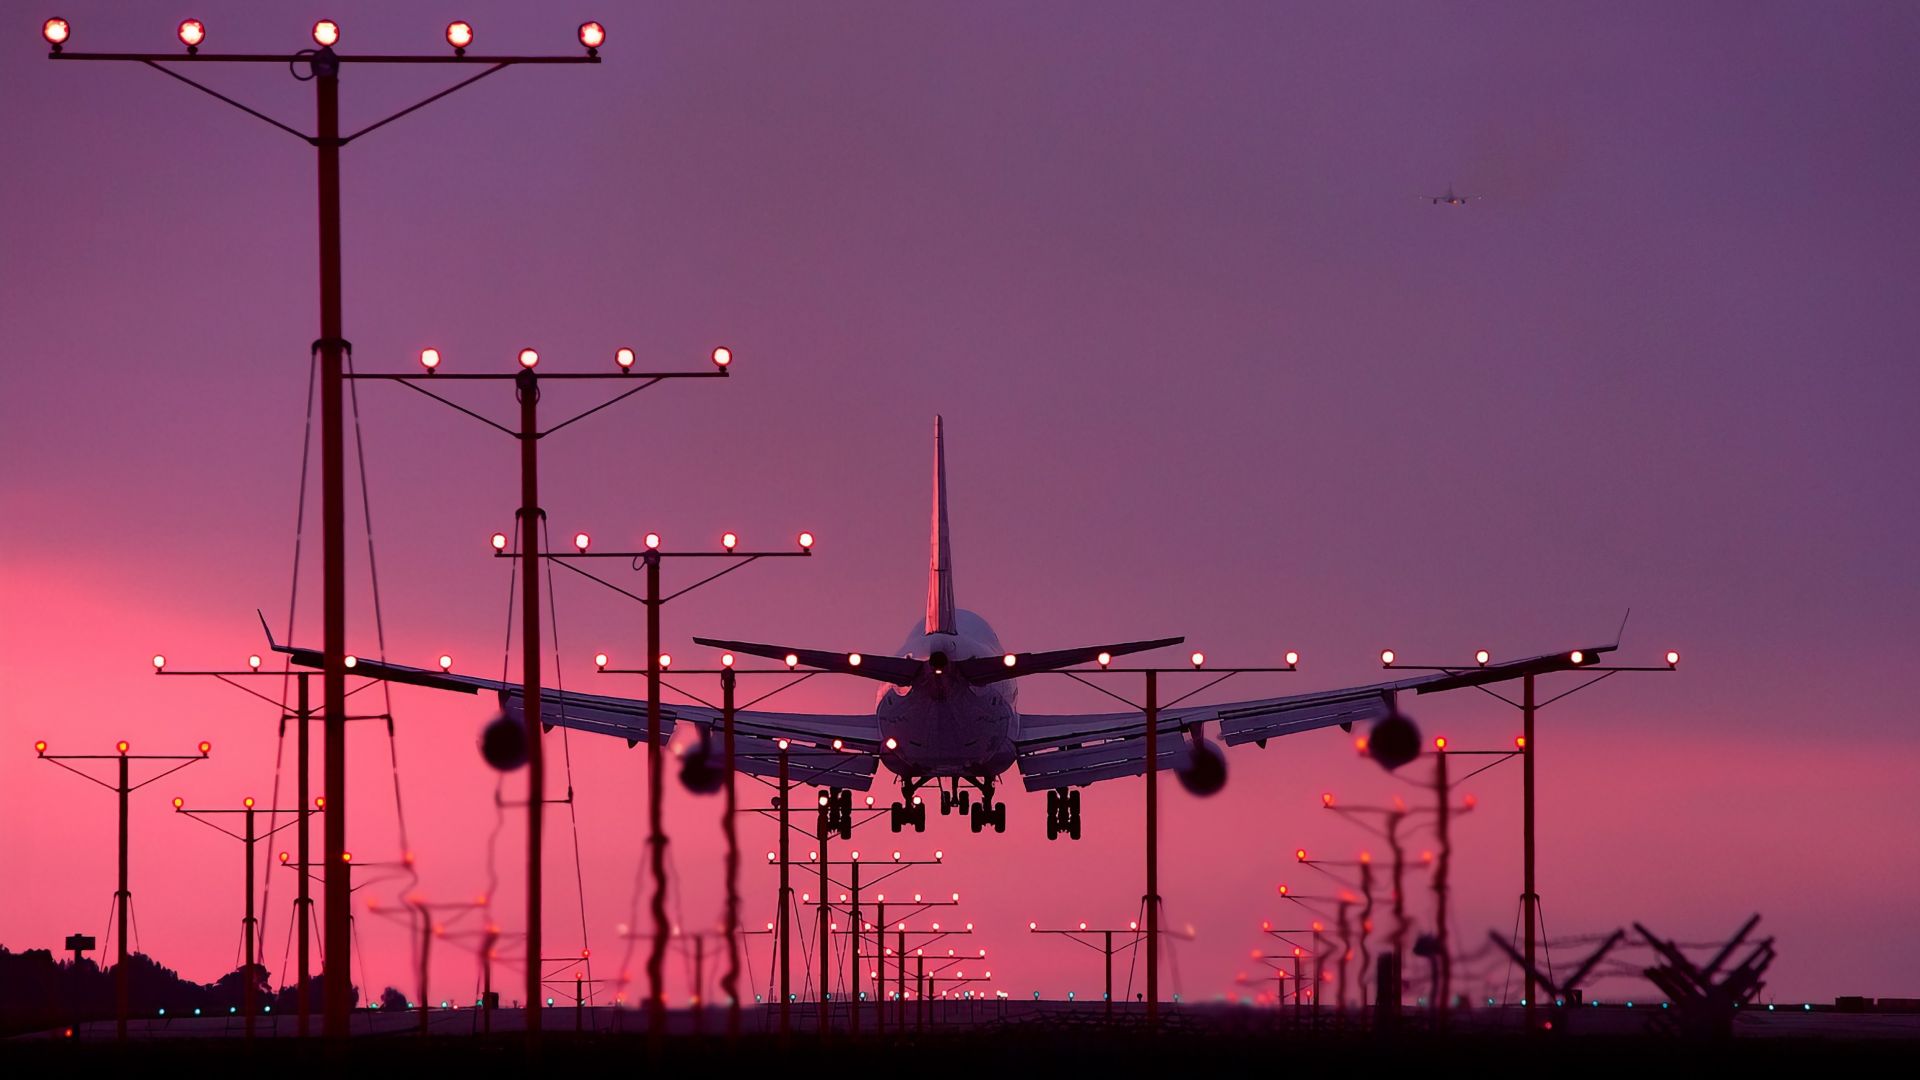 Aircraft, landing, sunset wallpaper, HD image, picture, background, dd8f3f